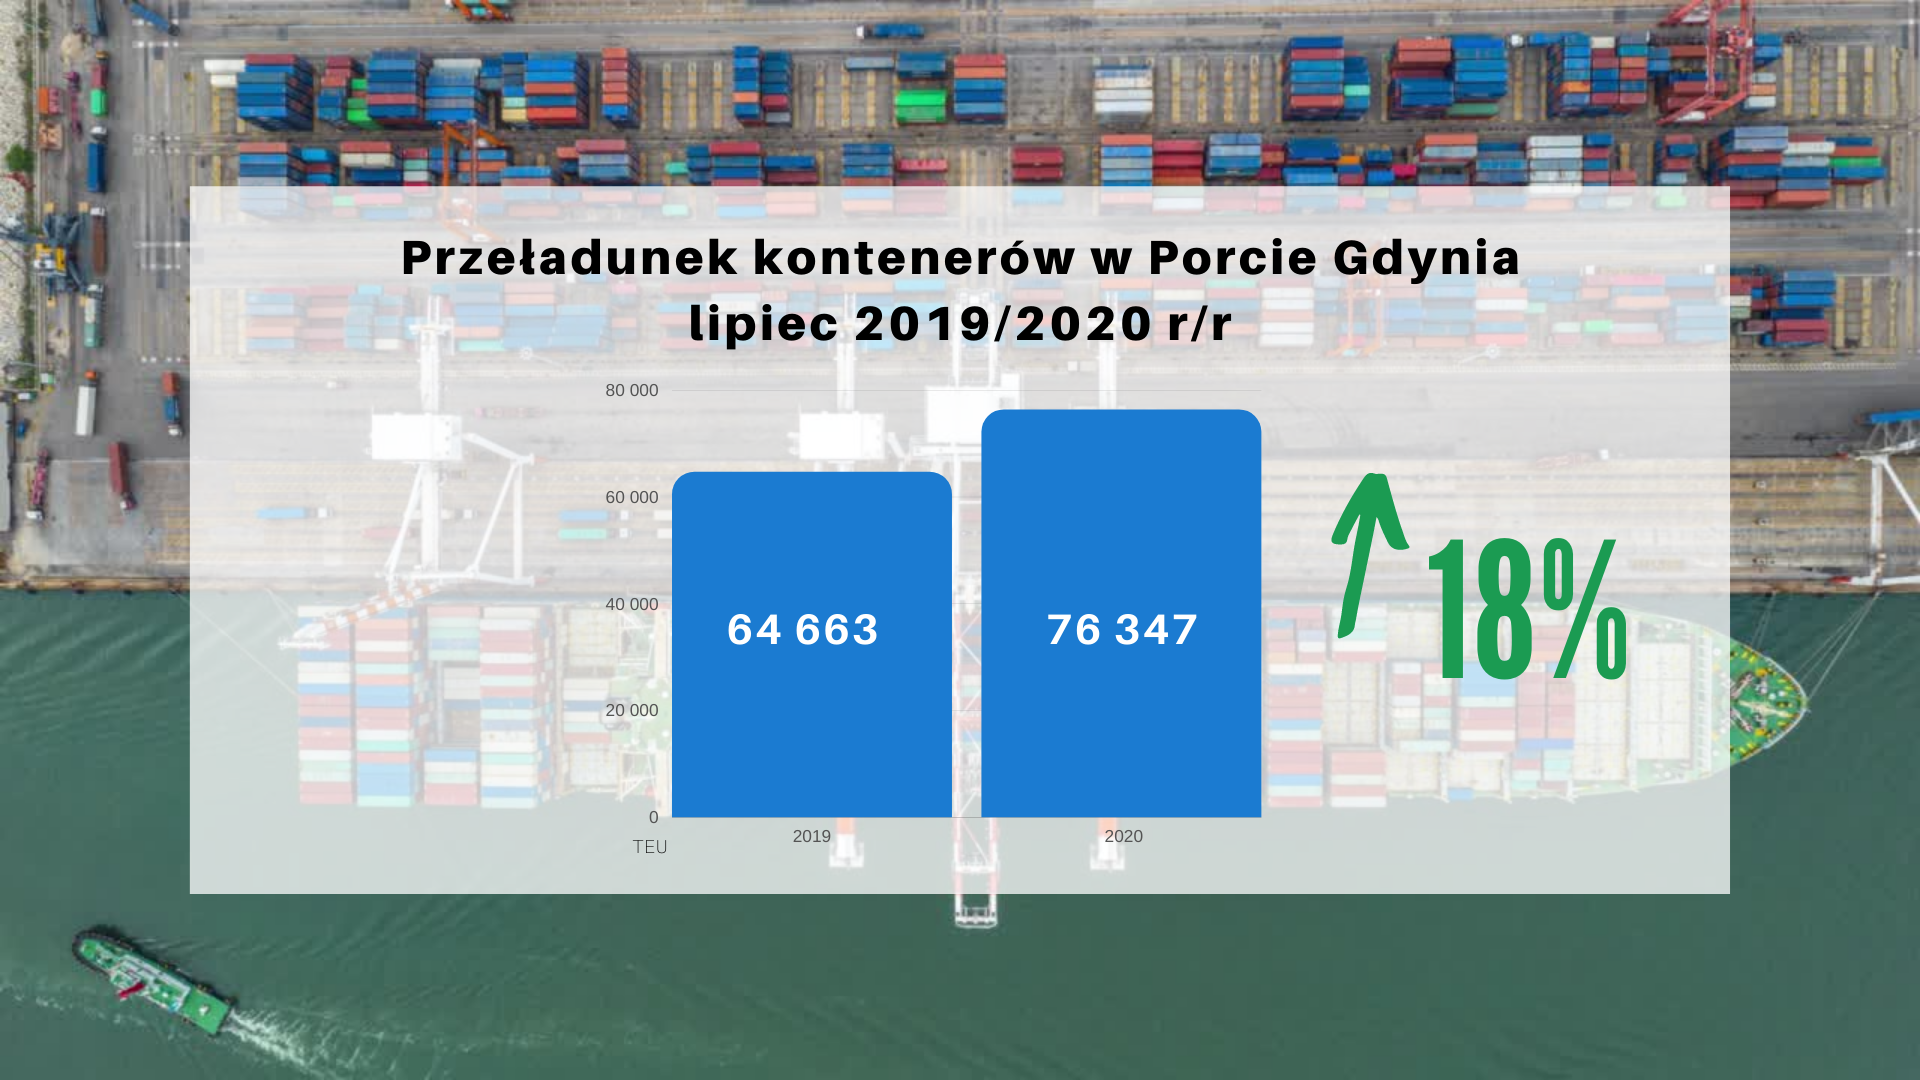 Port of Gdynia resists the Covid-19 crisis and achieve 18 percent increase in container handling - MarinePoland.com